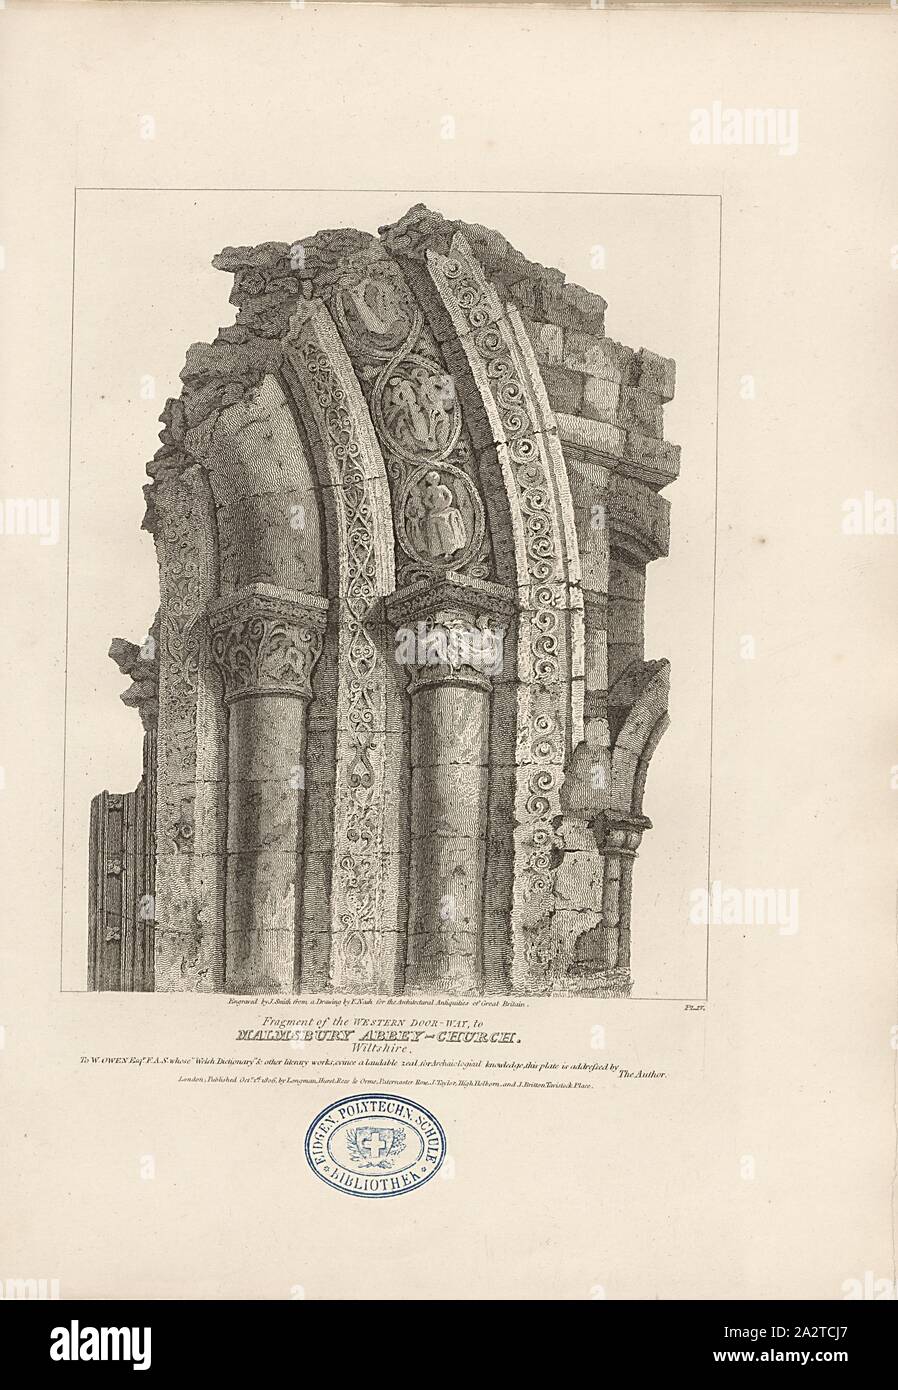 Fragment of the Western Door-Way, to Malmesbury Abbey-Church, Wiltshire, Ruin of the Porch to Malmsbury Abbey Church, signed: Engraved by J. Smith from a Drawing by F. Nash, Fig. 50, according to p. 12, Nash, F. (Drawing); Smith, J. (engr.), 1806, John Britton: The architectural antiquities of Great Britain: represented and illustrated in a series of views, elevations, plans, sections and details of various ancient English edifices: with historical and descriptive accounts of each. Bd. 1. London: J. Taylor, 1807-1826 Stock Photo